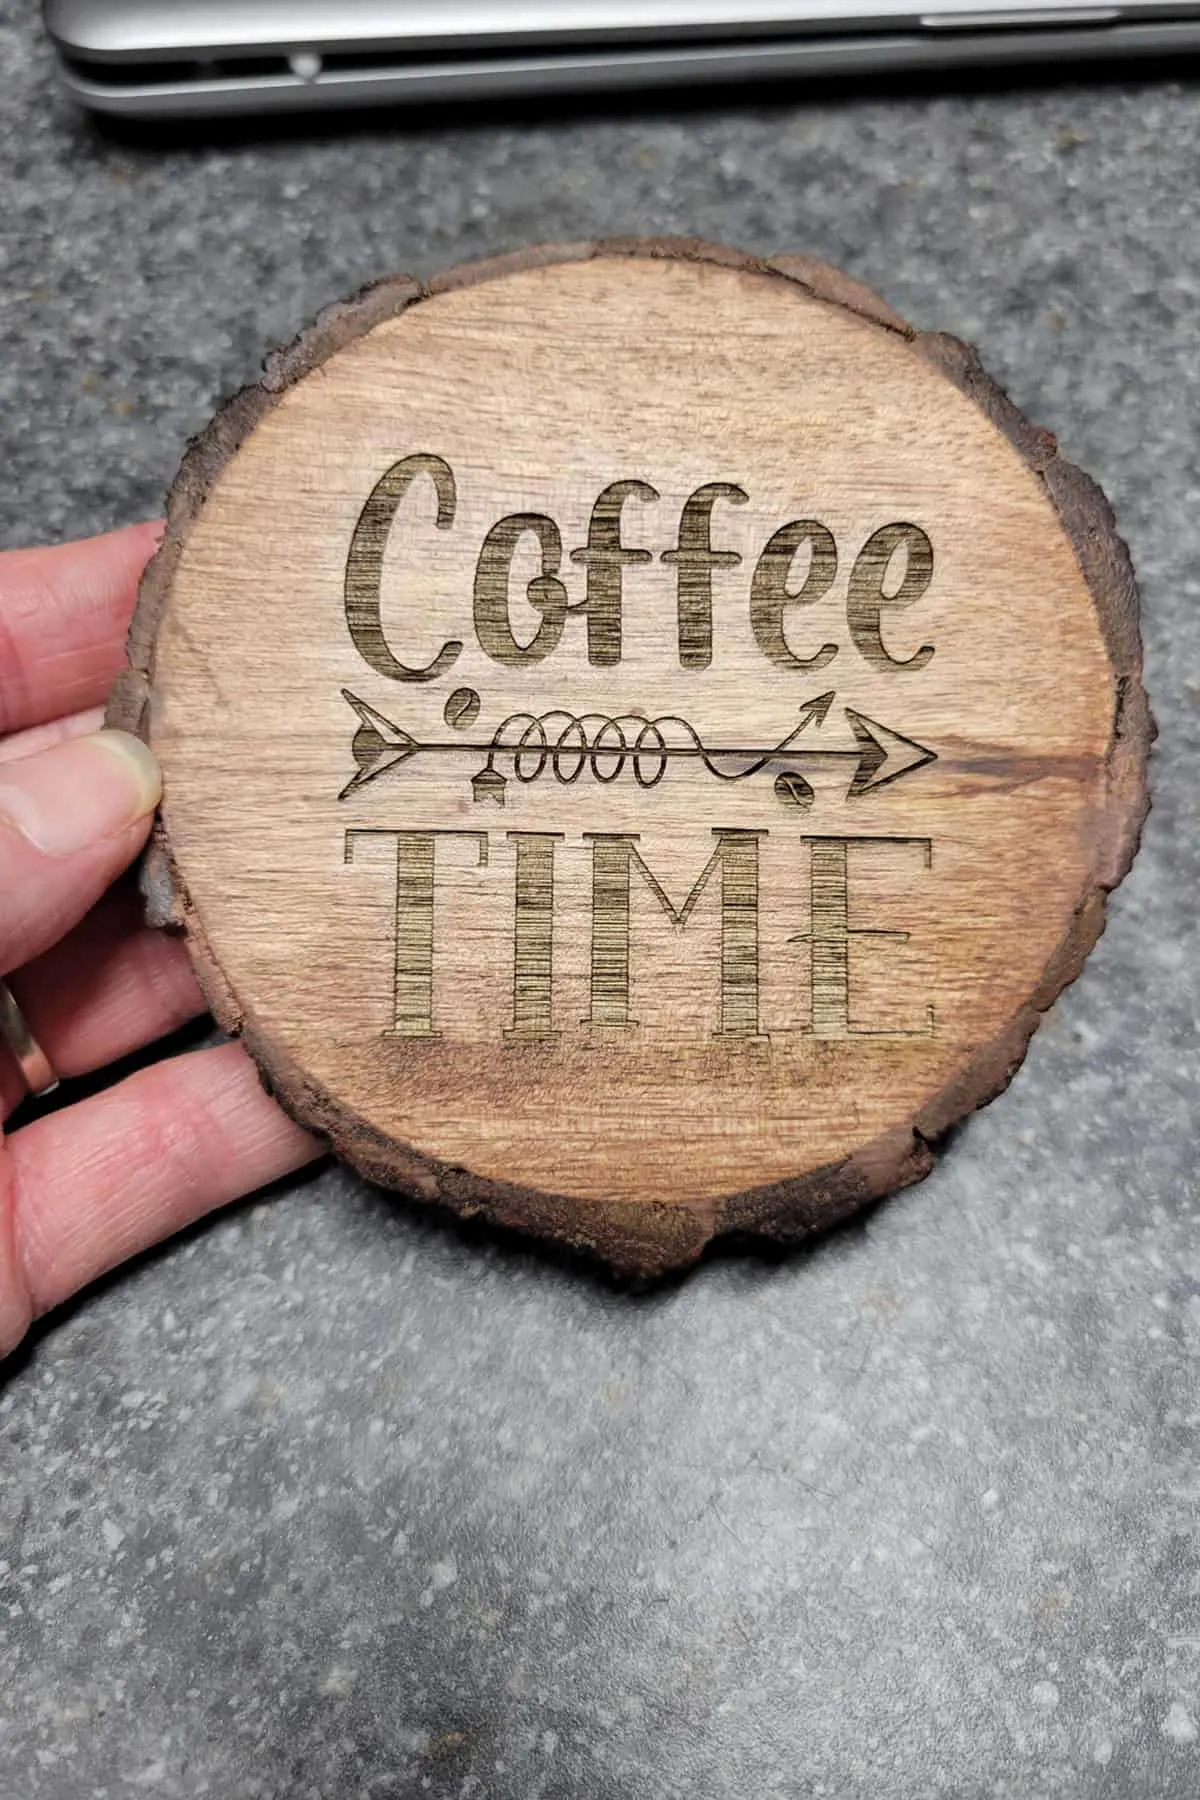 laser engraved wood coaster that says "coffee time"